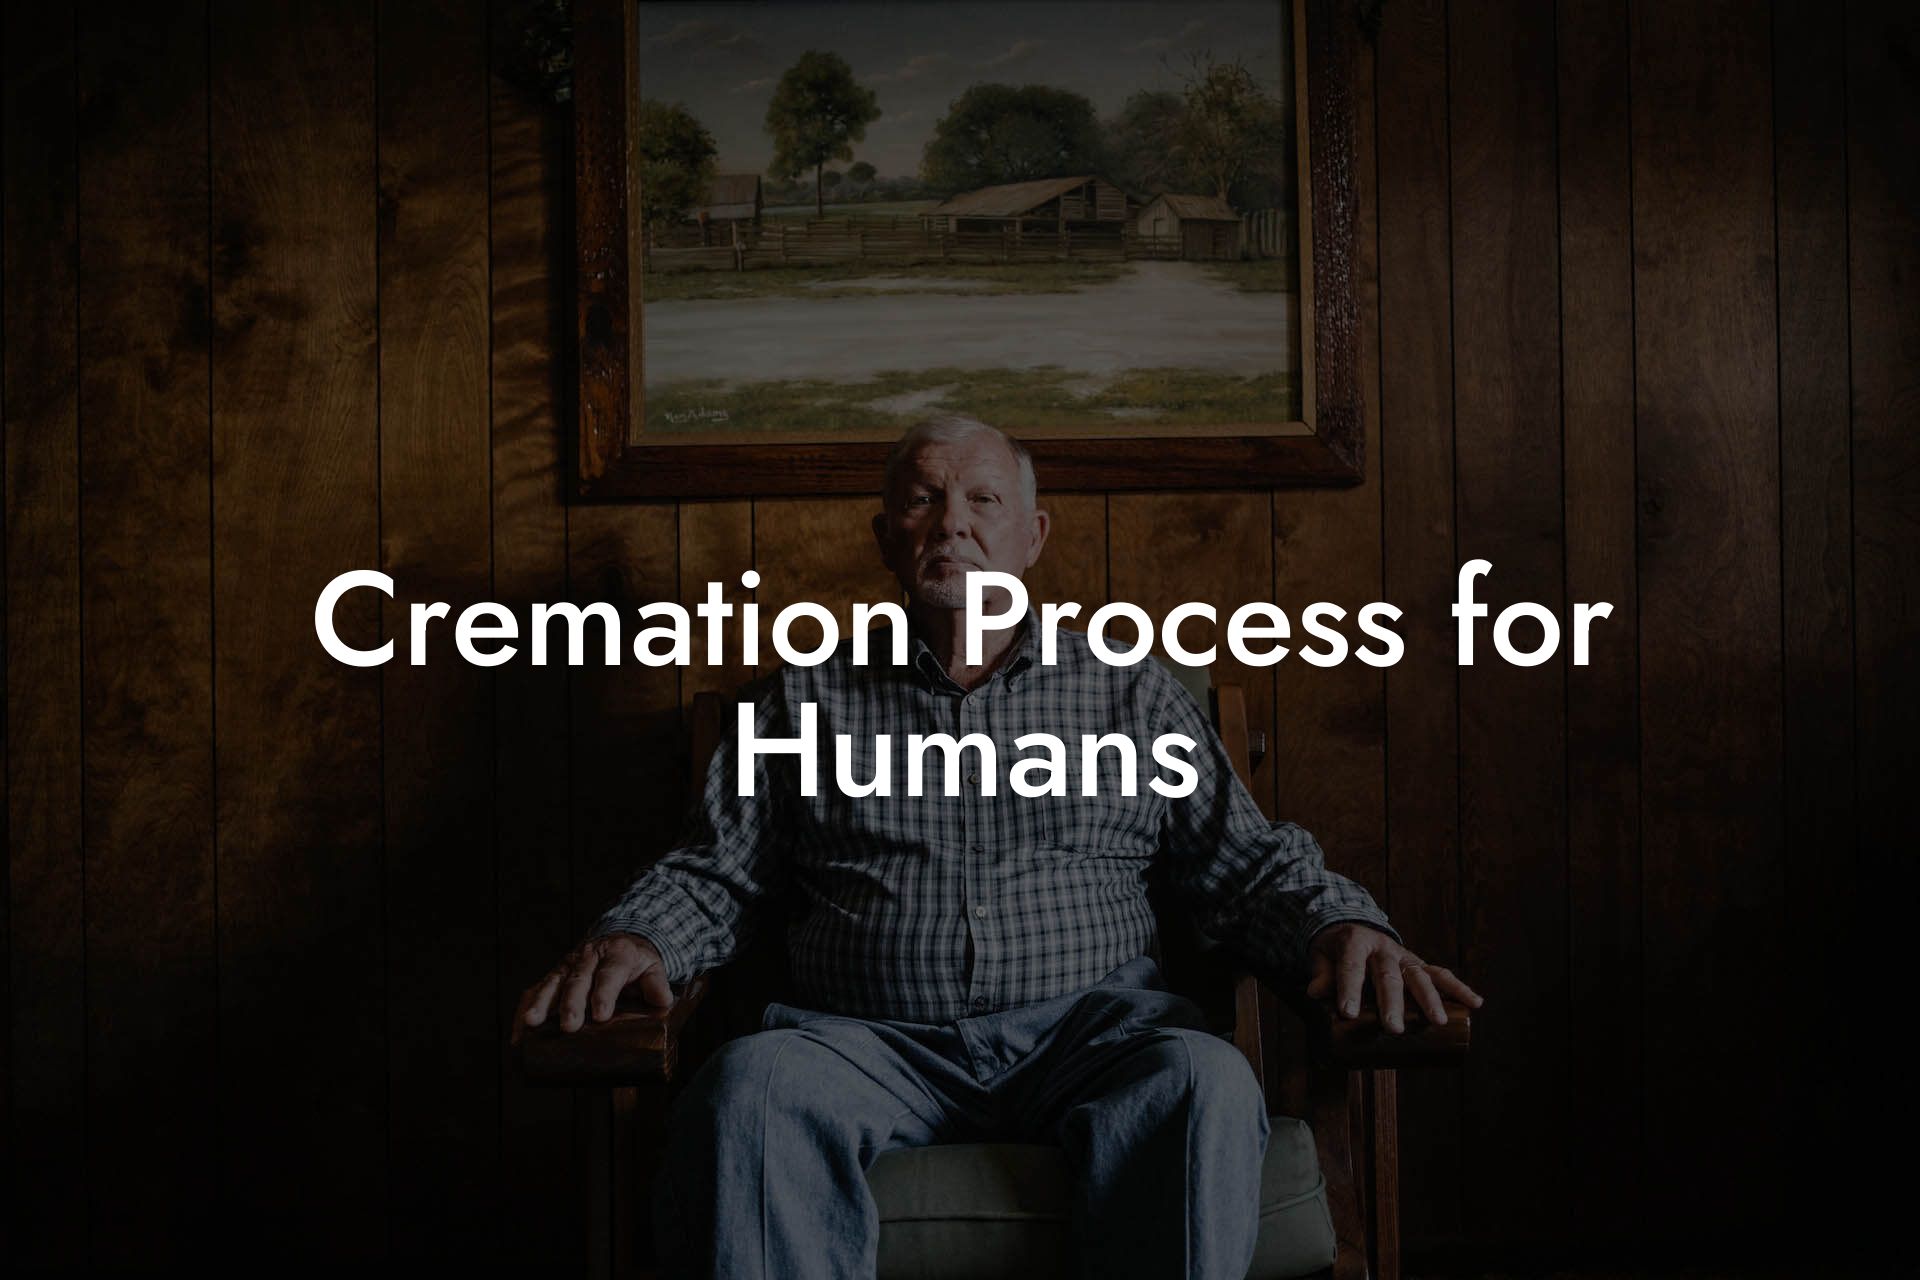 Cremation Process for Humans